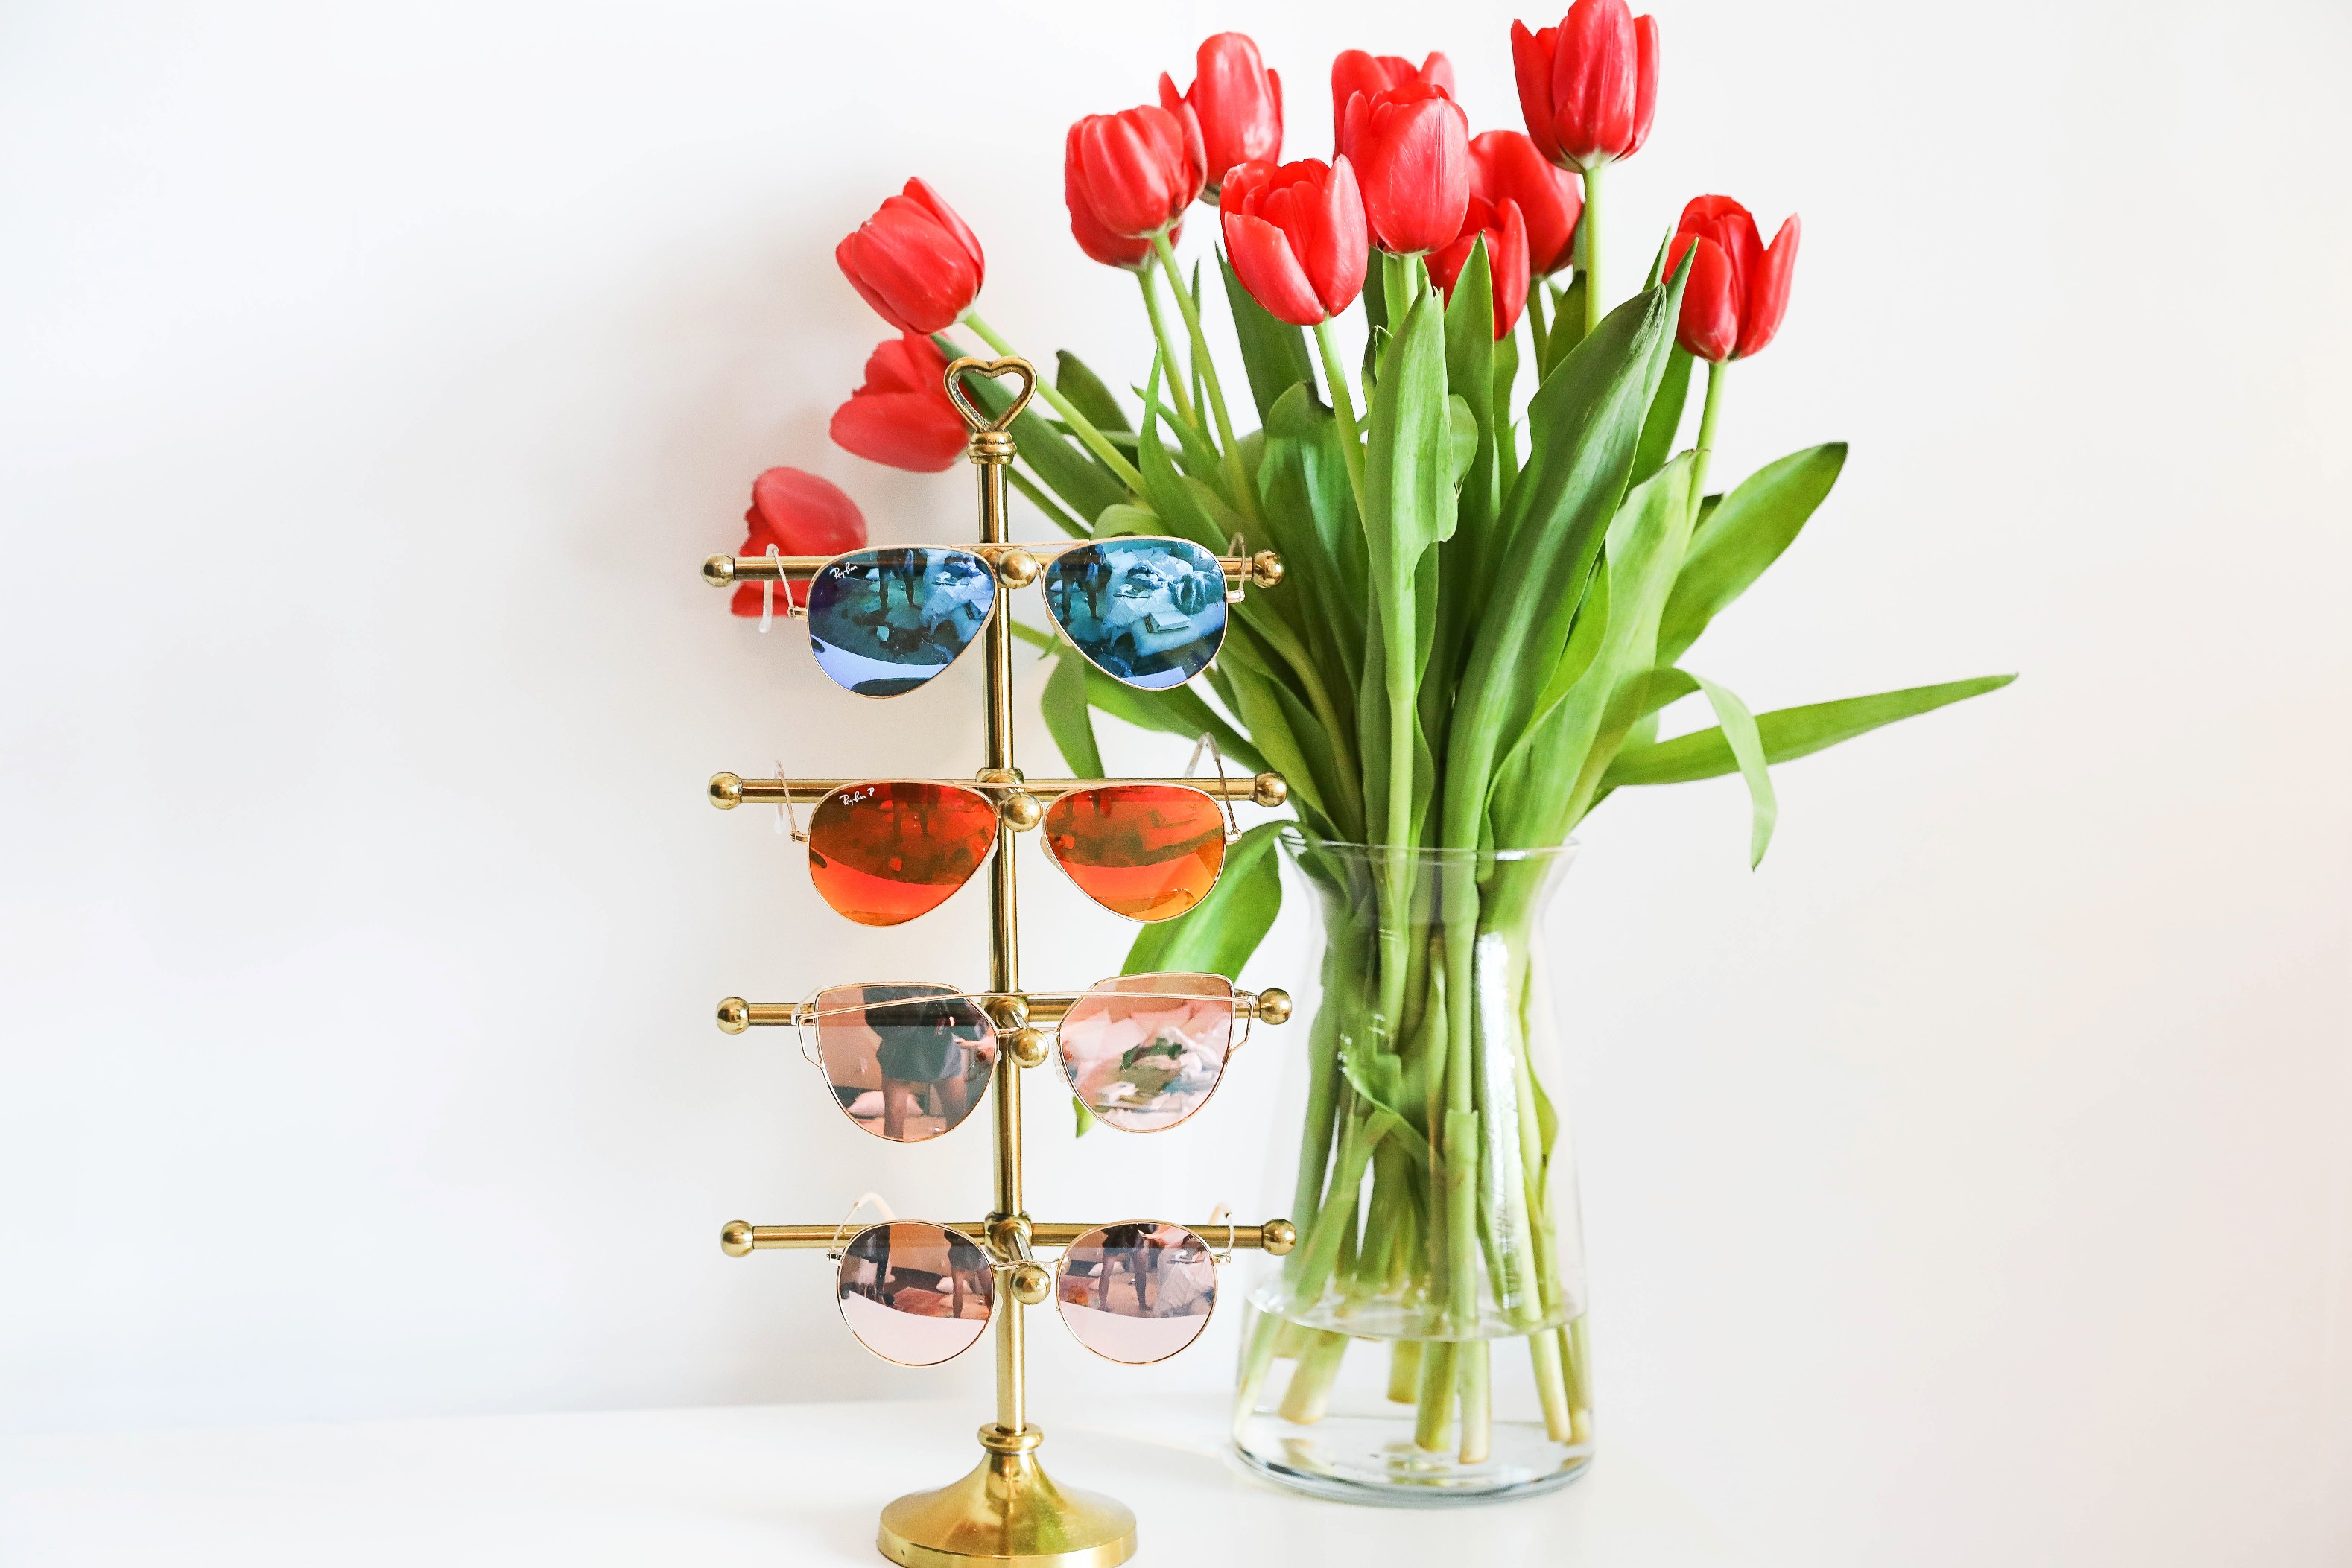 Spring cleaning tips and tricks plus cute storage roundup on fashion blog daily dose of charm by lauren lindmark